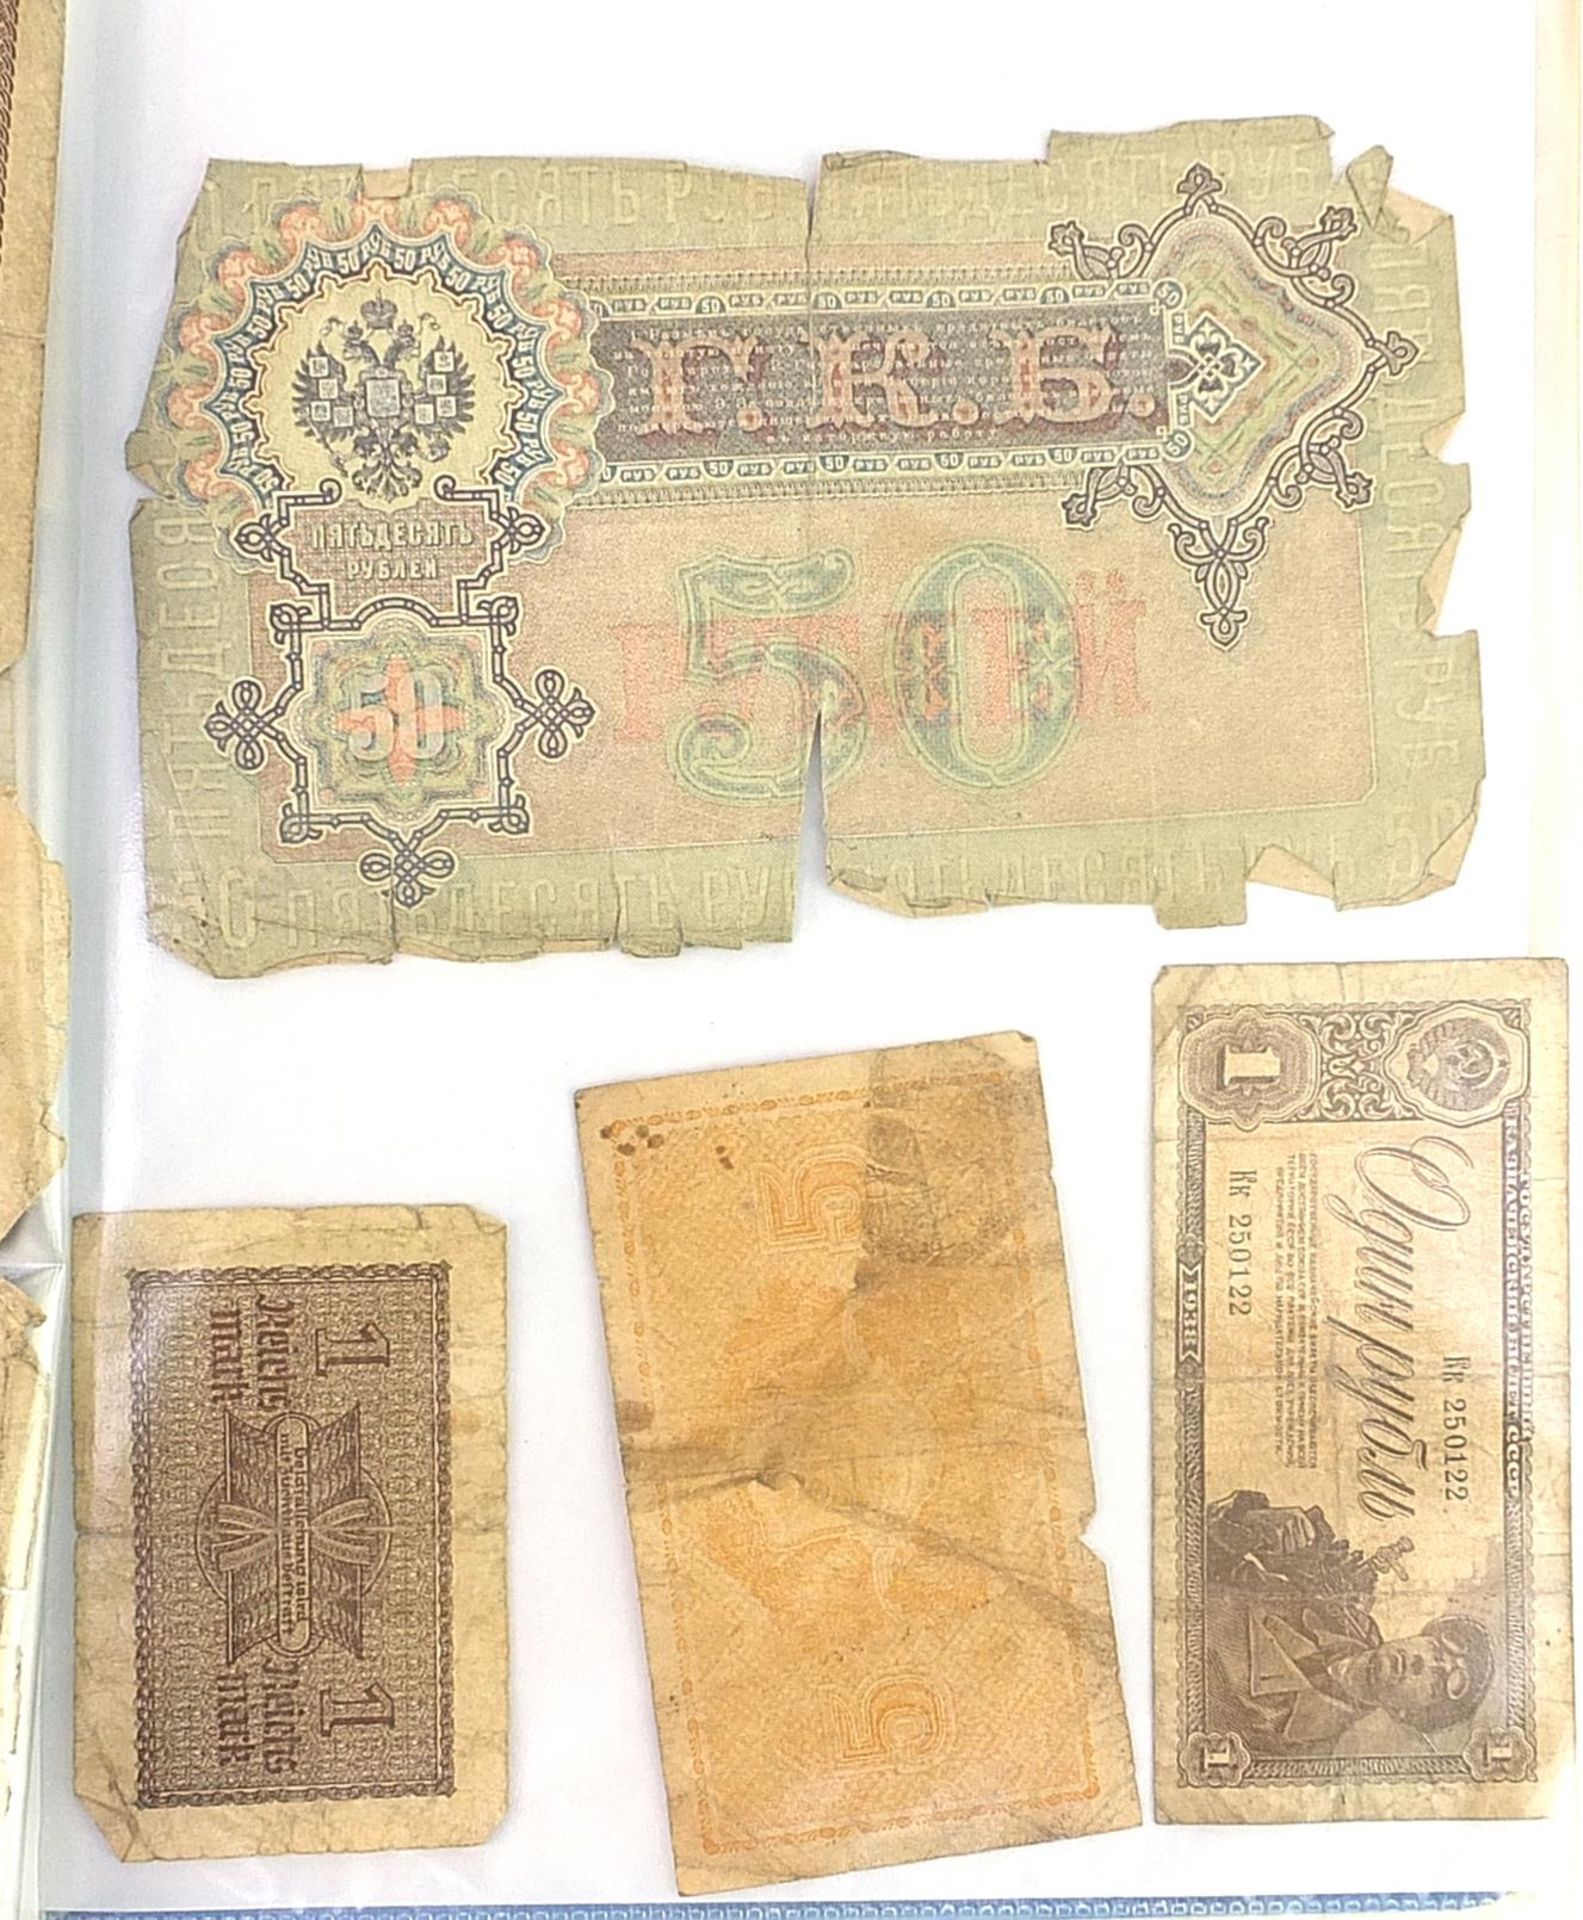 World banknotes including German and Russian examples - Image 13 of 16